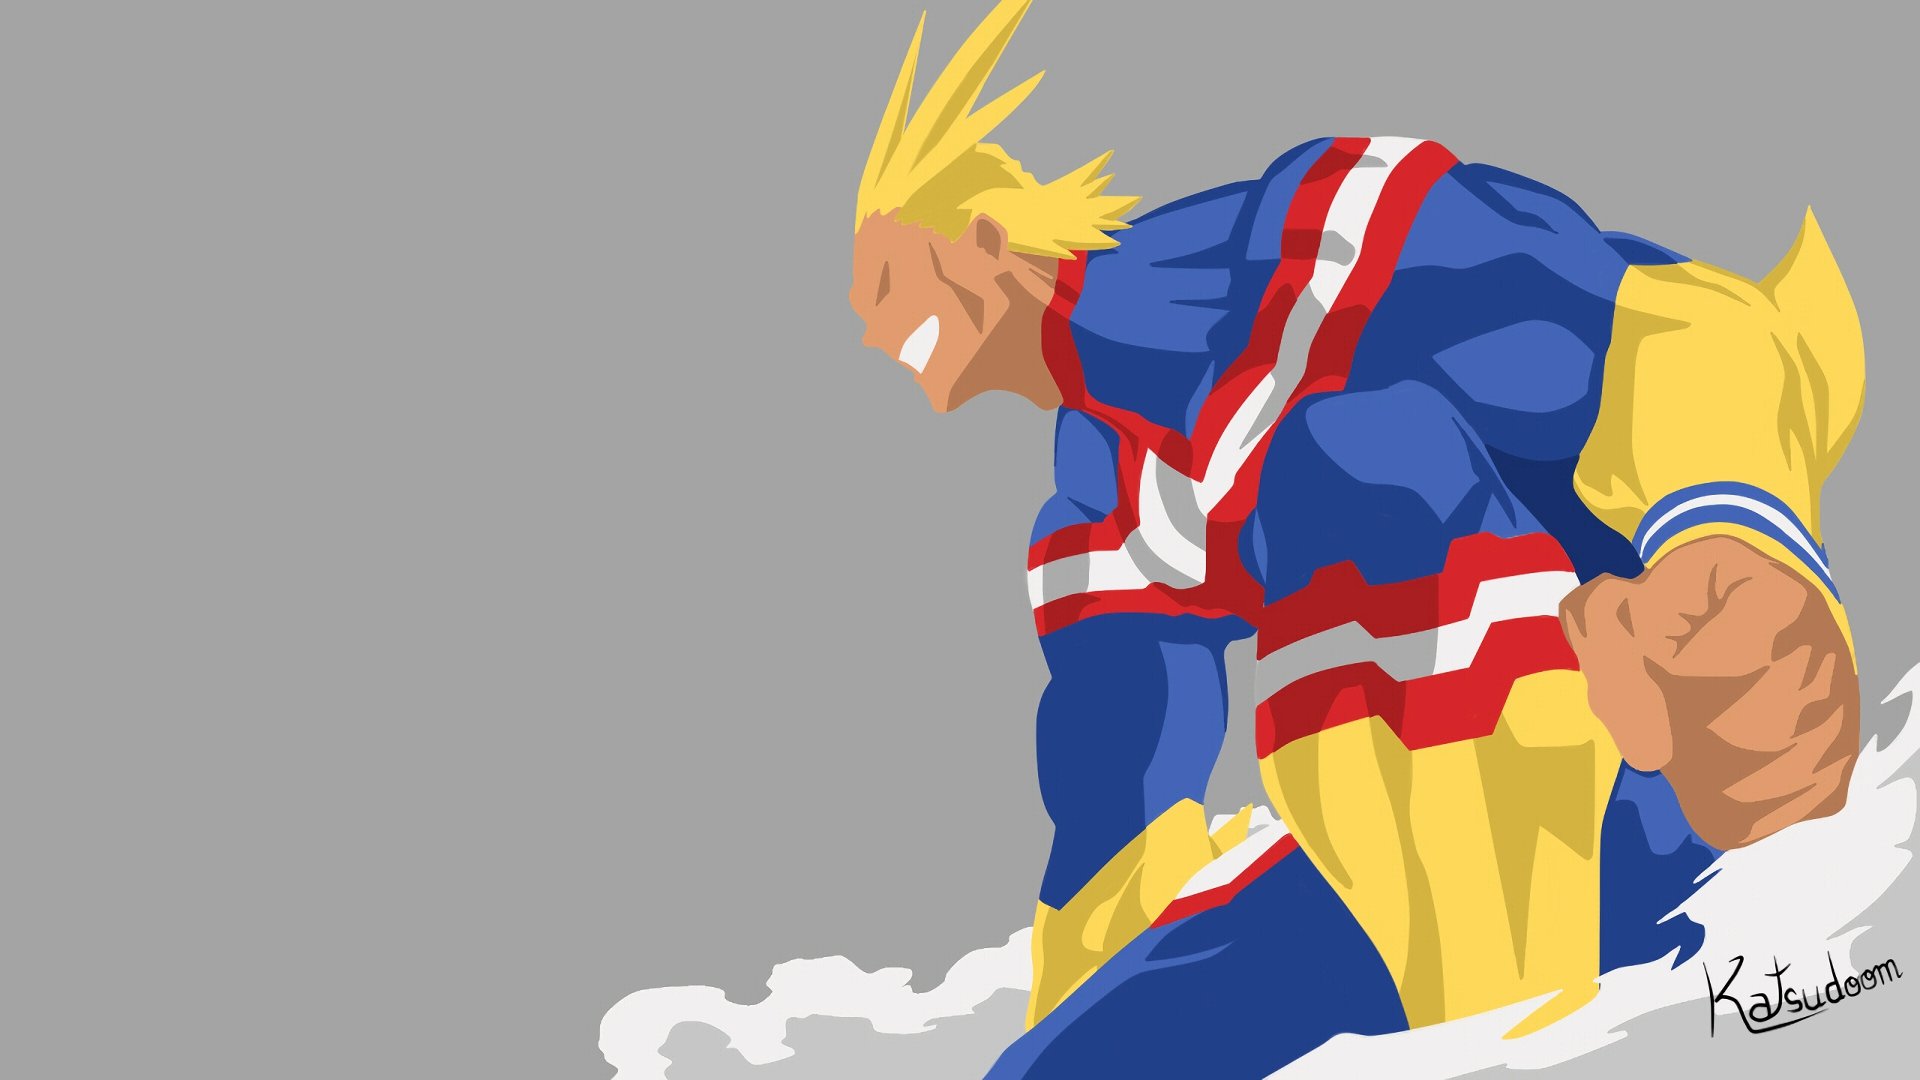 Desktop Wallpaper Anime Boy, All Might, Boku No Hero Academia, HD Image, Picture, Background, Dt5auk